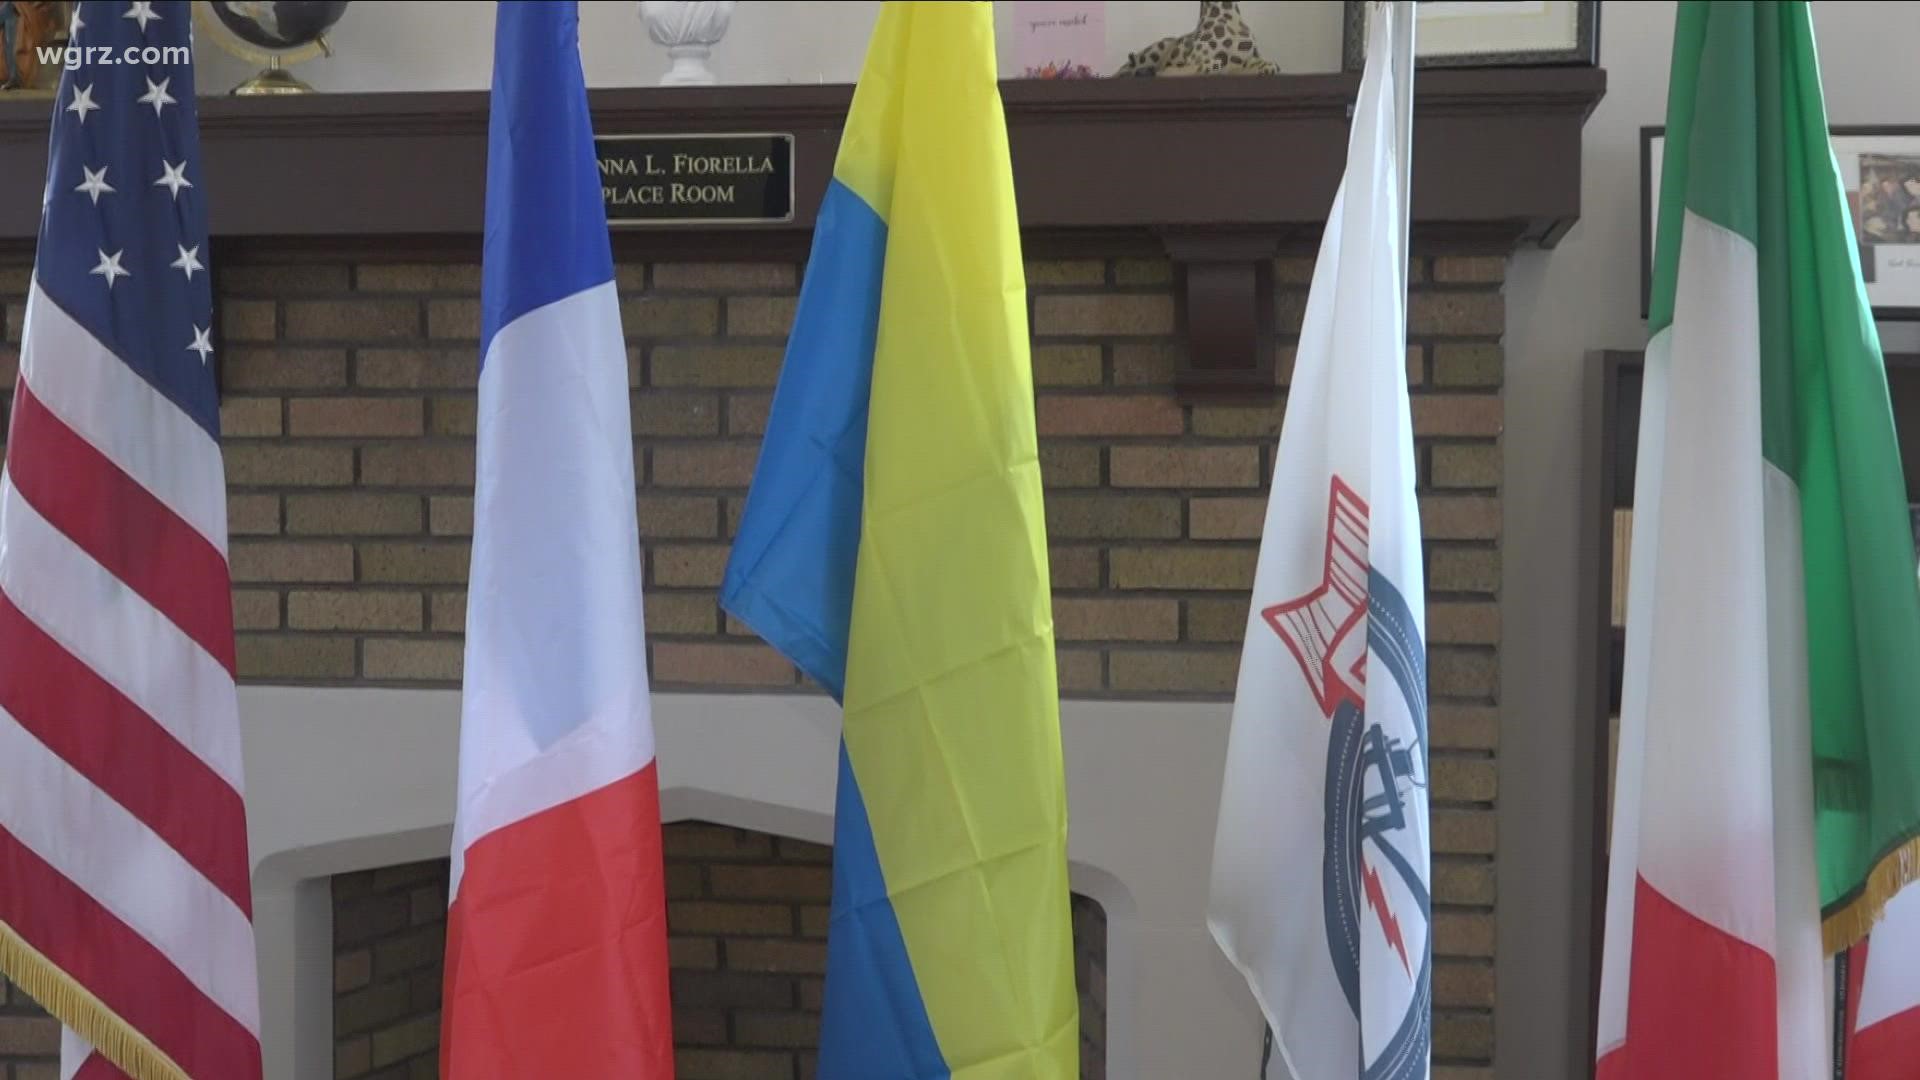 The 'Stand Together for Ukraine' is hosted by community and cultural organizations in Western New York to raise money and donations for the Ukrainian community.